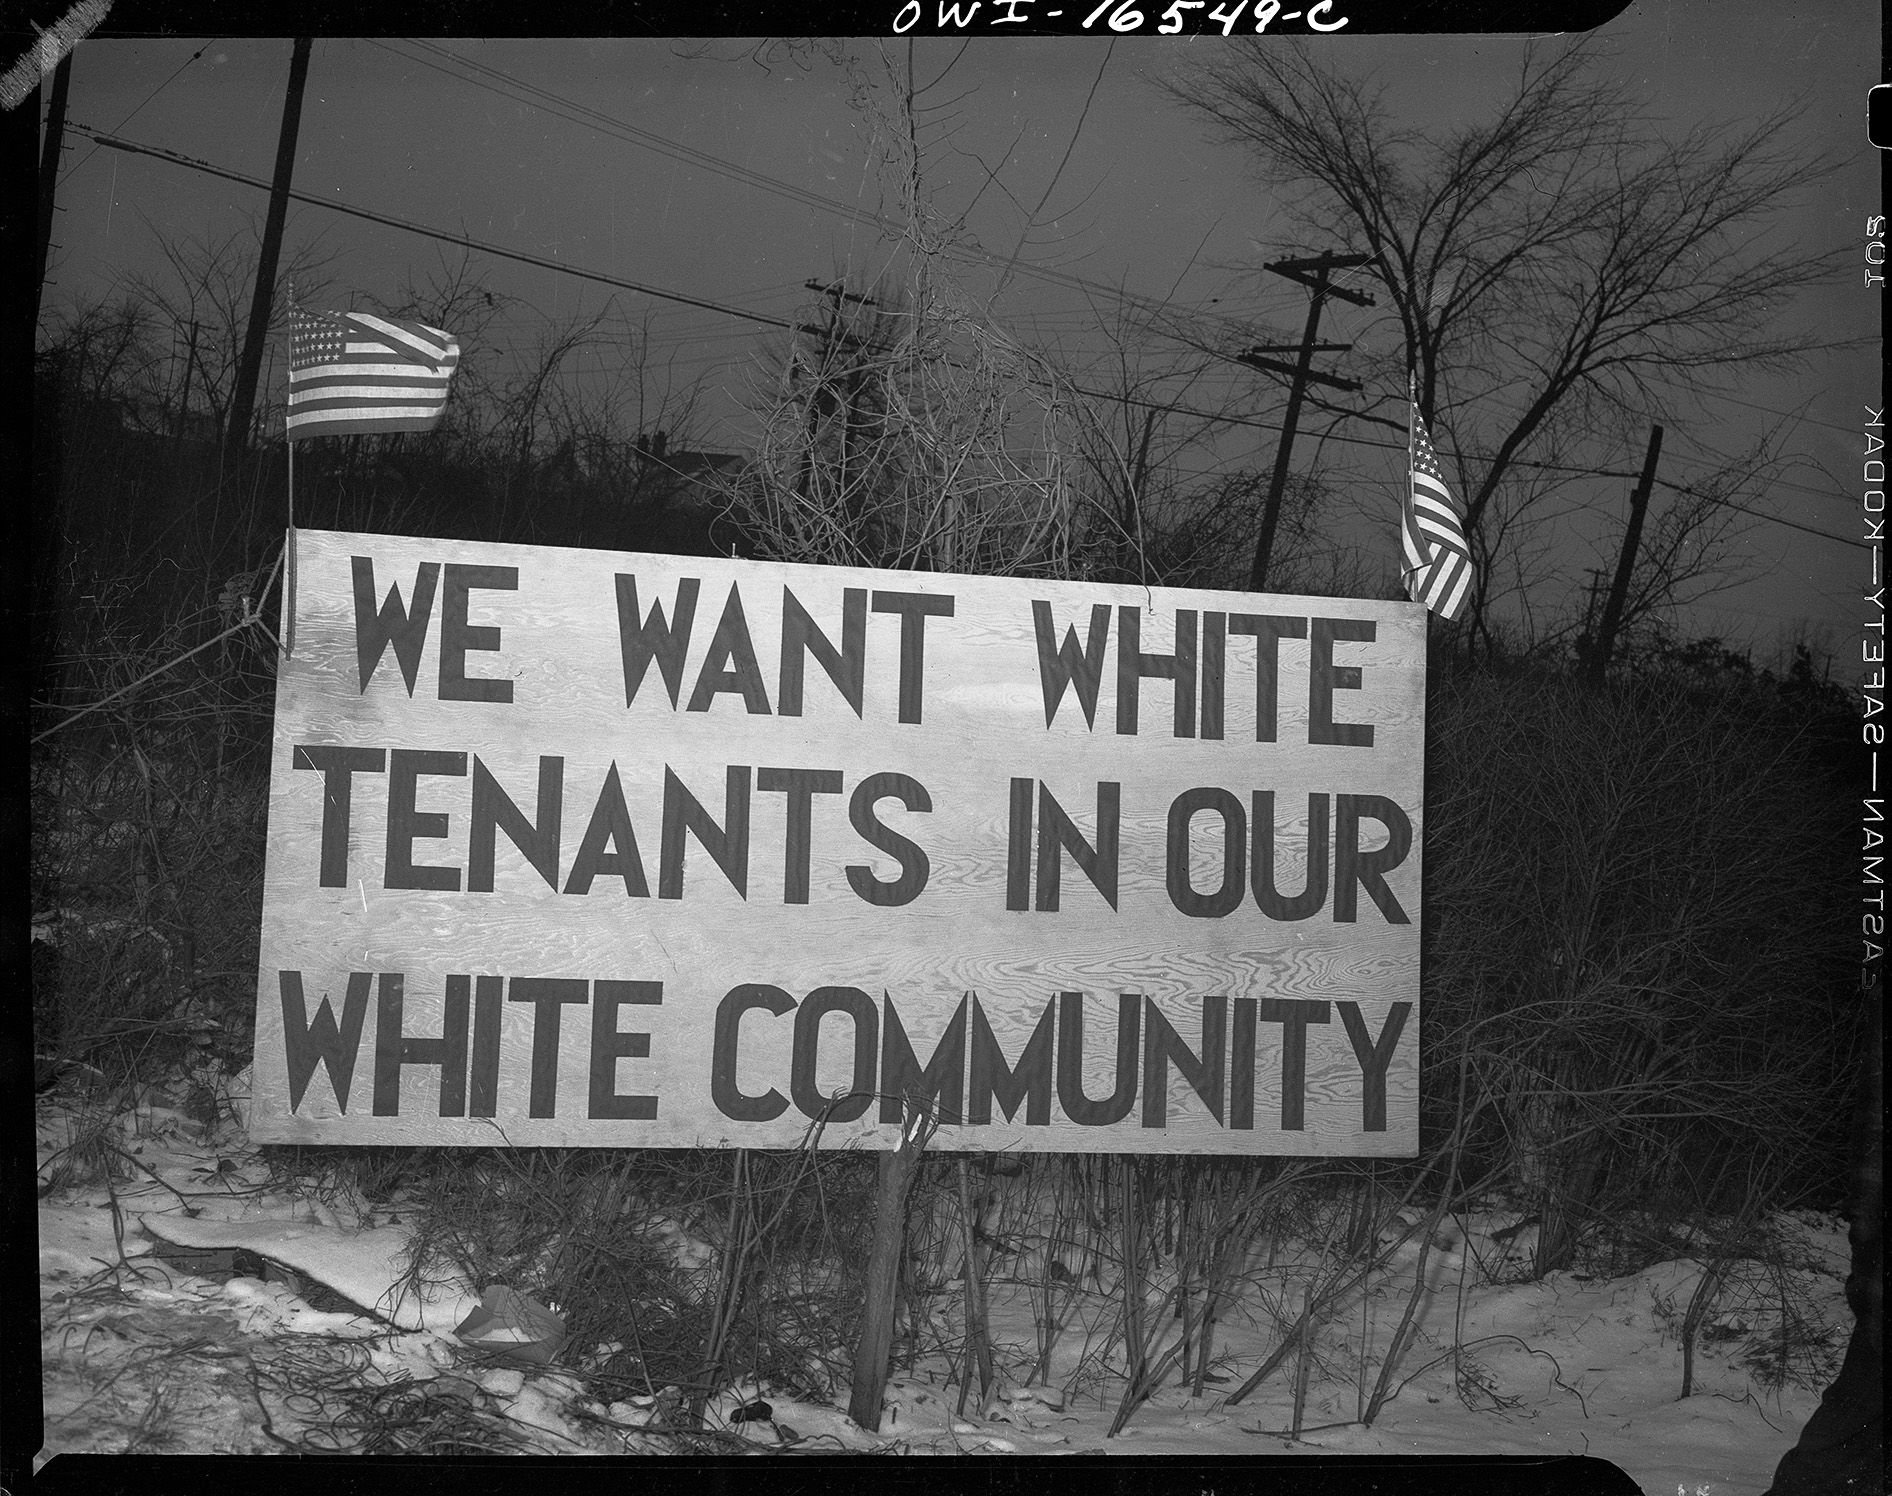 A photo of a sign in Detroit reads, "We want white tenants in our community"